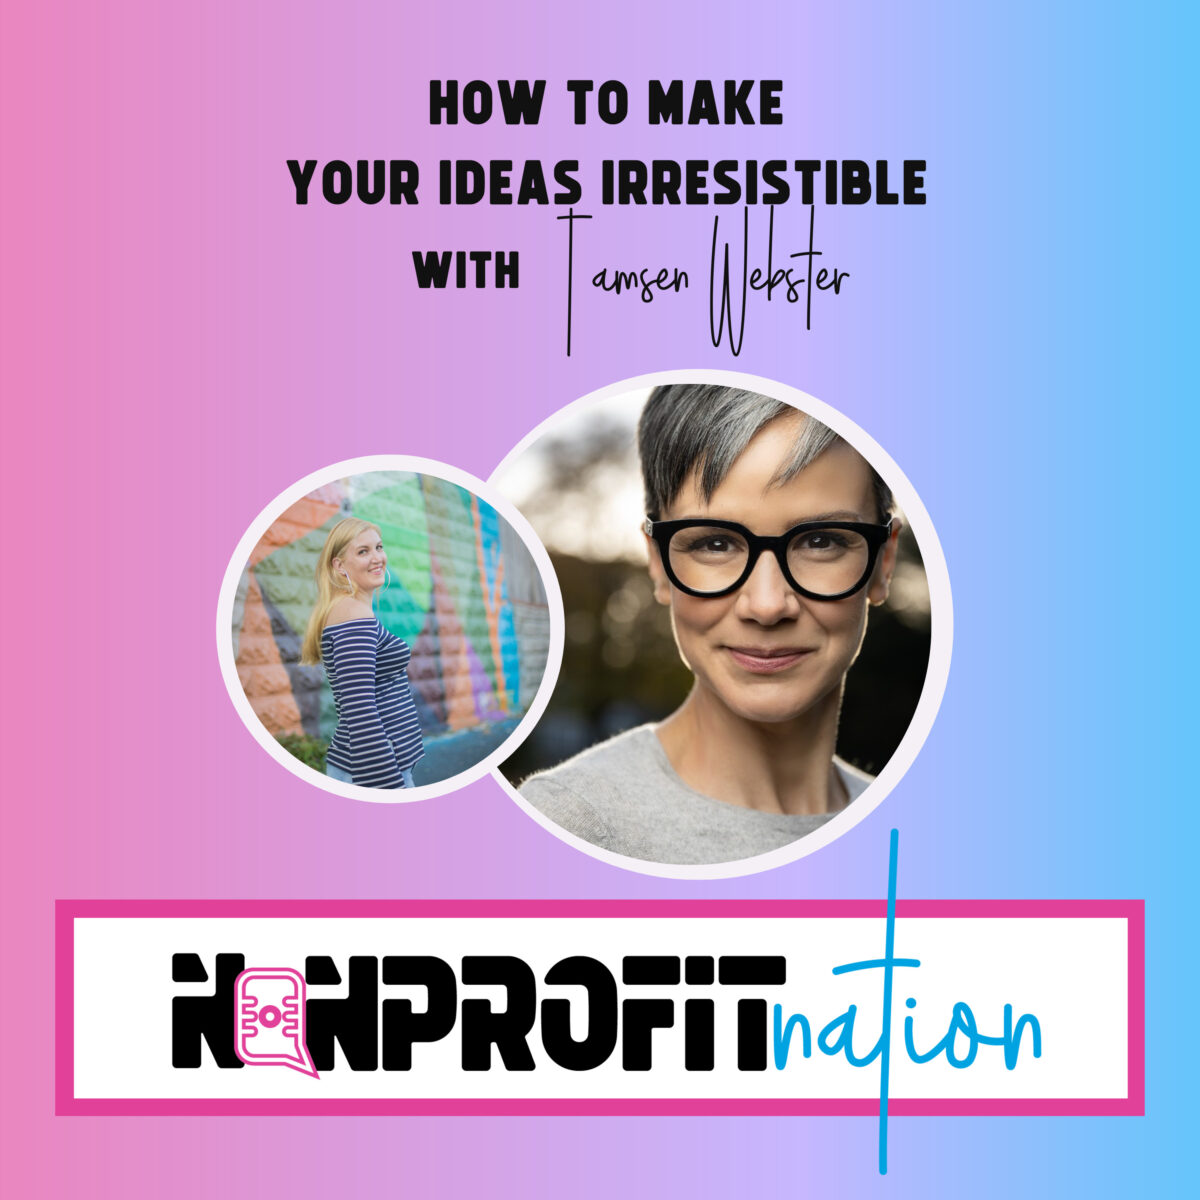 How to Make Your Ideas Irresistible with Tamsen Webster